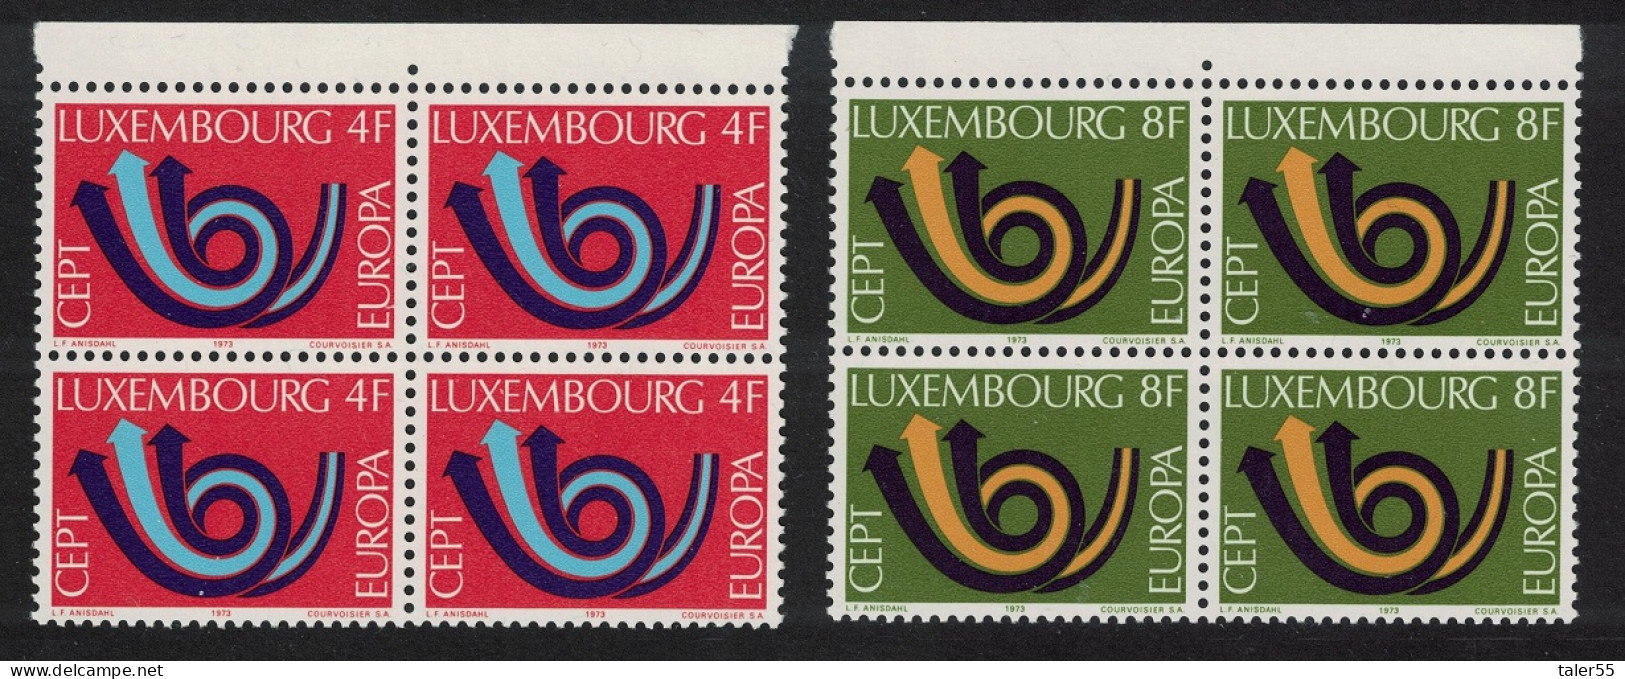 Luxembourg Post Horn Europa 2v Blocks Of 4 1973 MNH SG#906-907 MI#862-863 - Nuevos